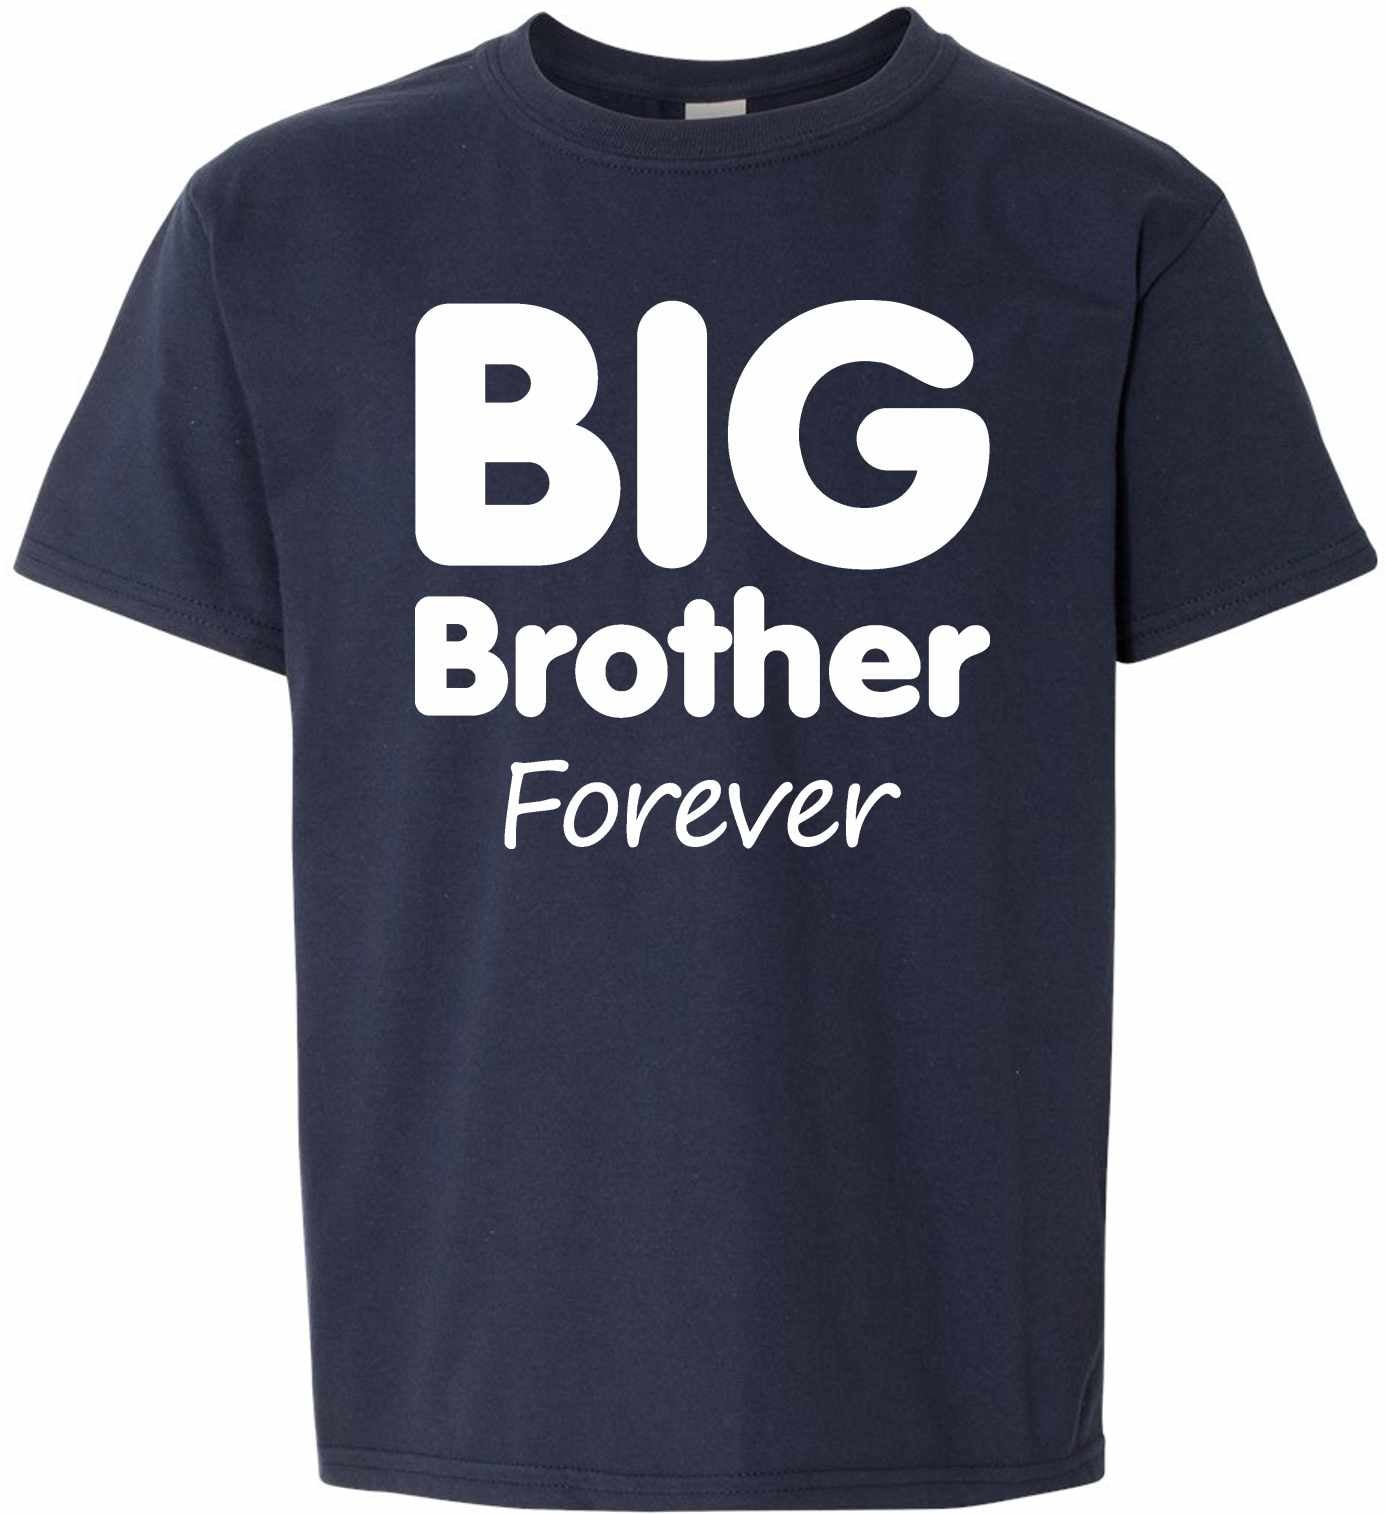 Big Brother Forever on Youth T-Shirt (#952-201)